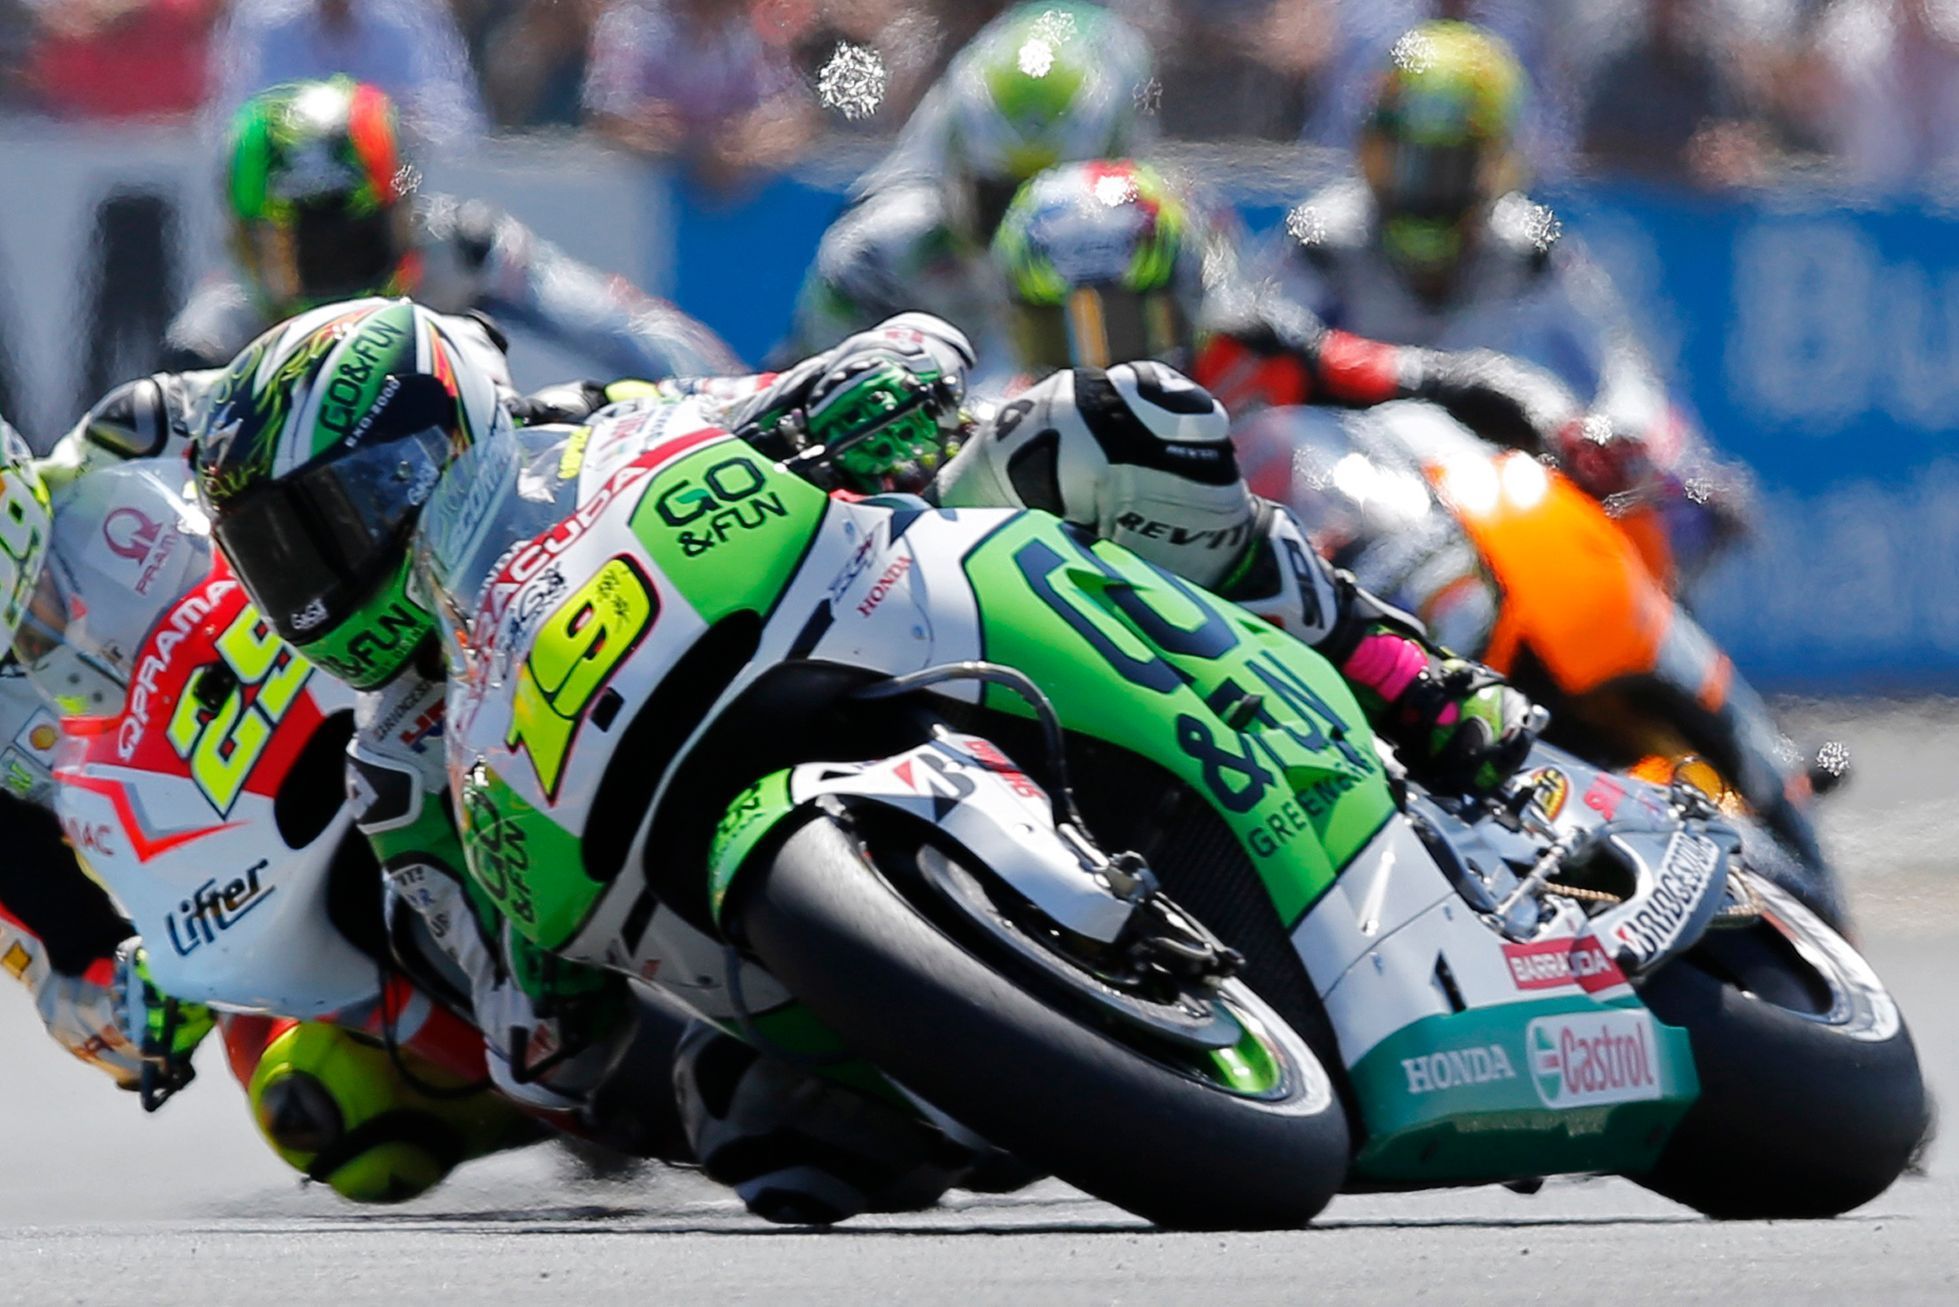 Honda MotoGP rider Bautista of Spain rides during the French Grand Prix in Le Mans circuit